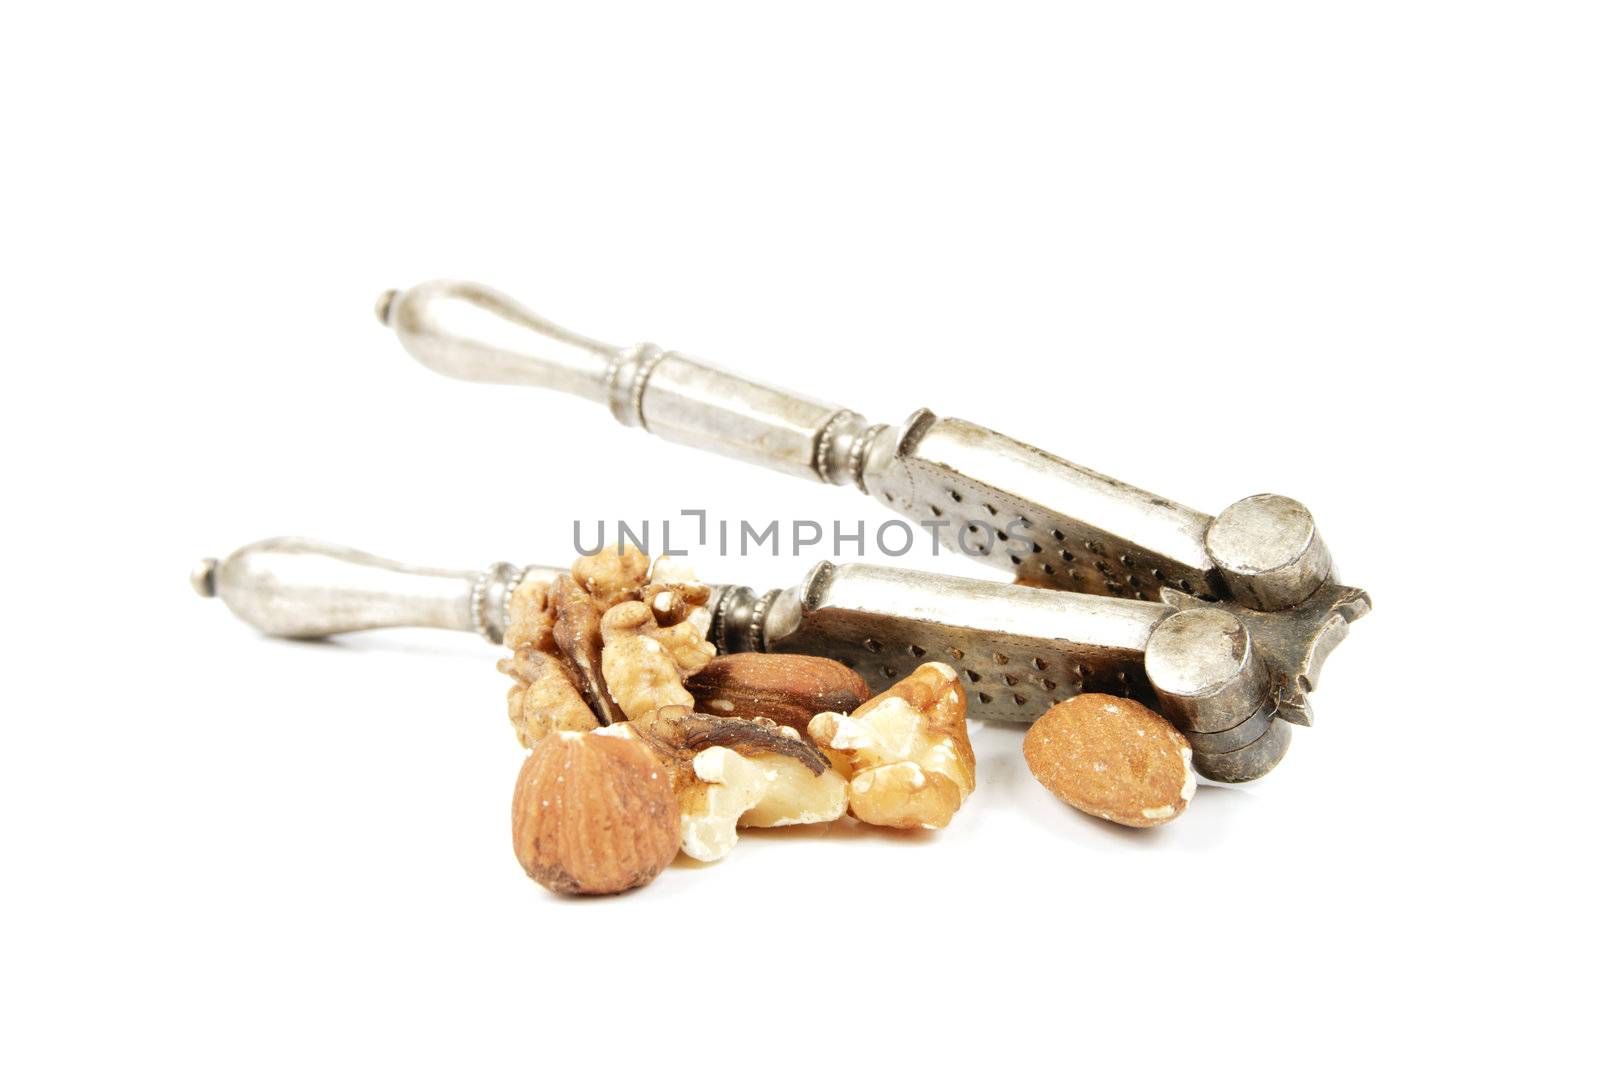 Assorted mixed nuts with a silver nutcracker on a reflective white background